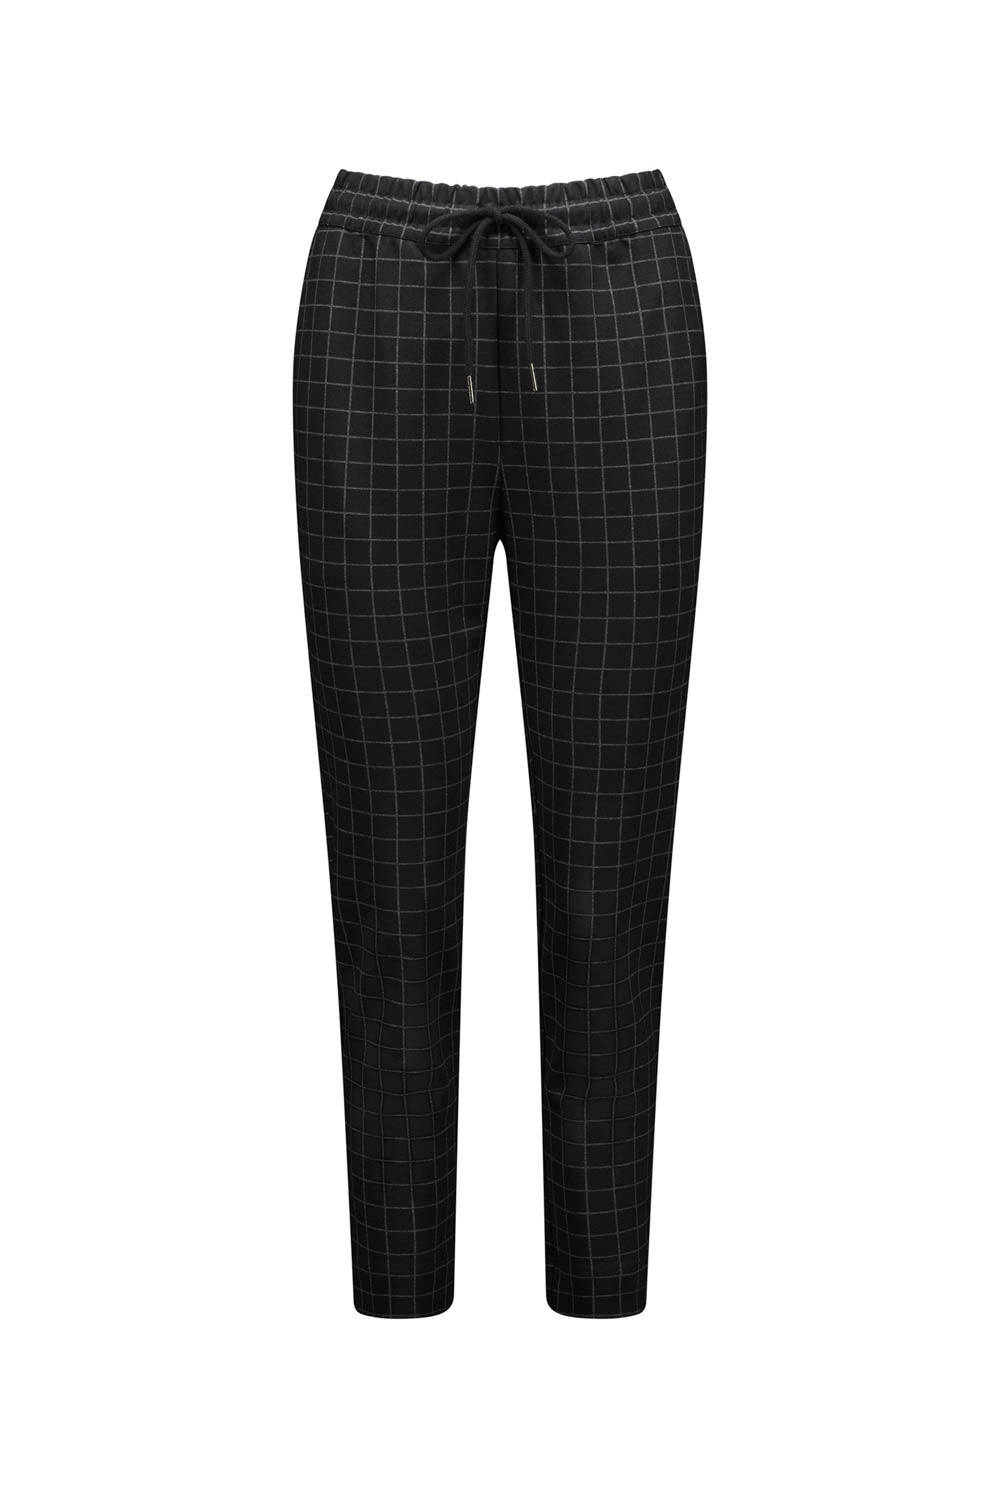 VERGE JUSTICE JOGGER - BLACK CHECK - THE VOGUE STORE